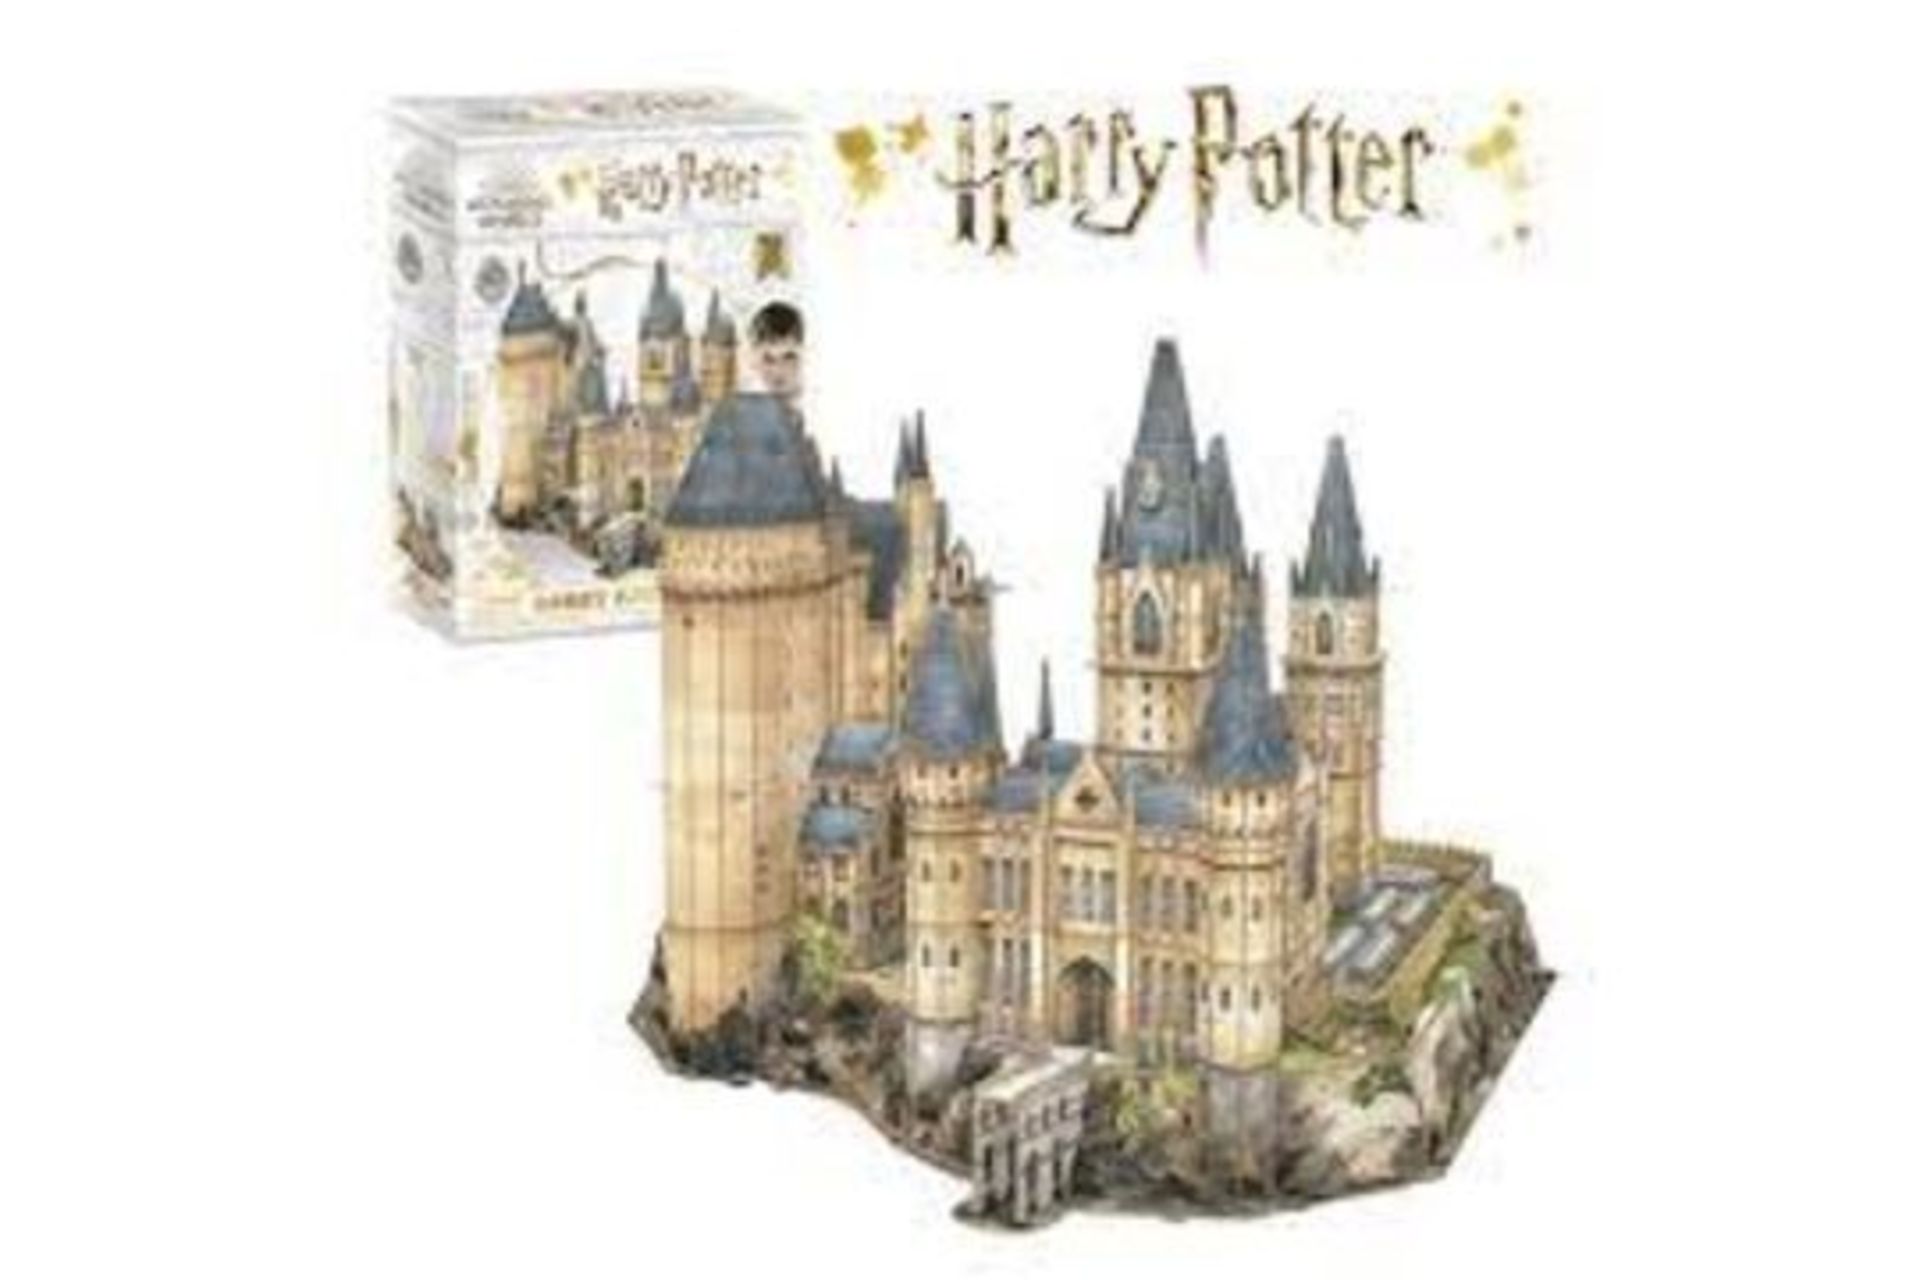 4 X BRAND NEW HARRY POTTER WIZARDING WORLD HOGWARTS GREAT WALL 3D PUZZLES RRP £70 EACH R19